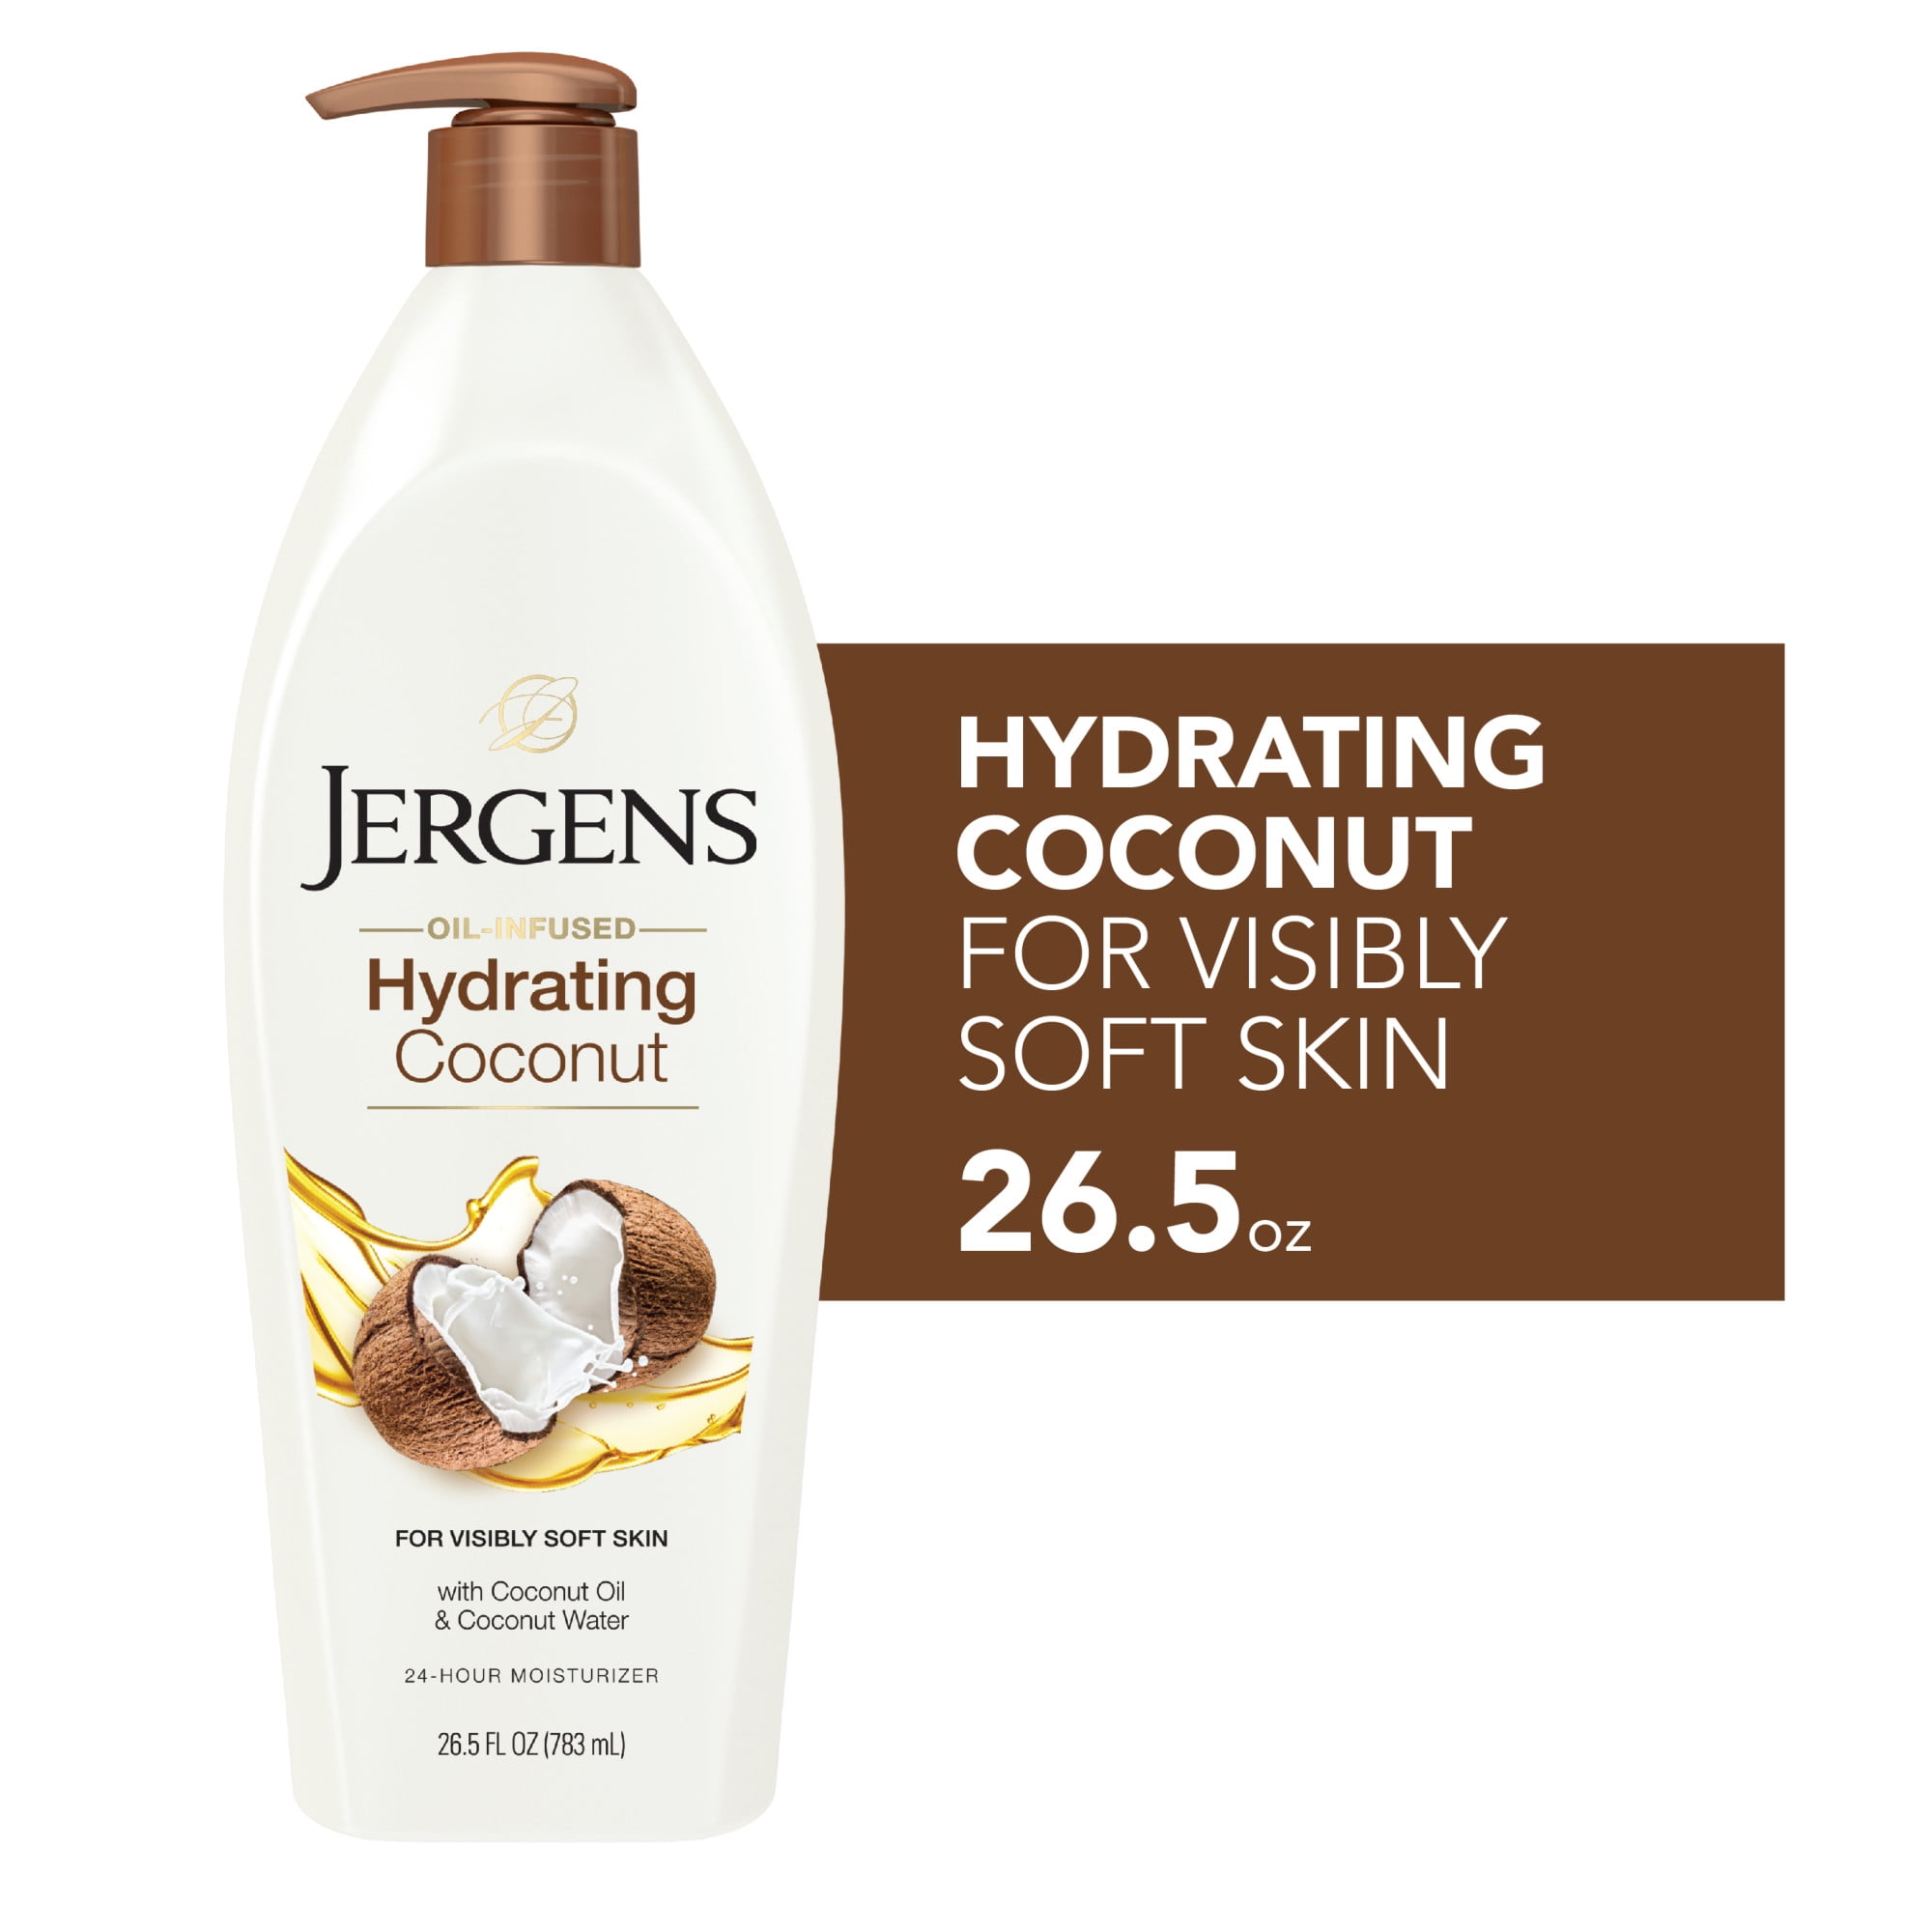 Jergens Hand and Body Lotion, Hydrating Coconut Body Lotion, 26.5 Oz